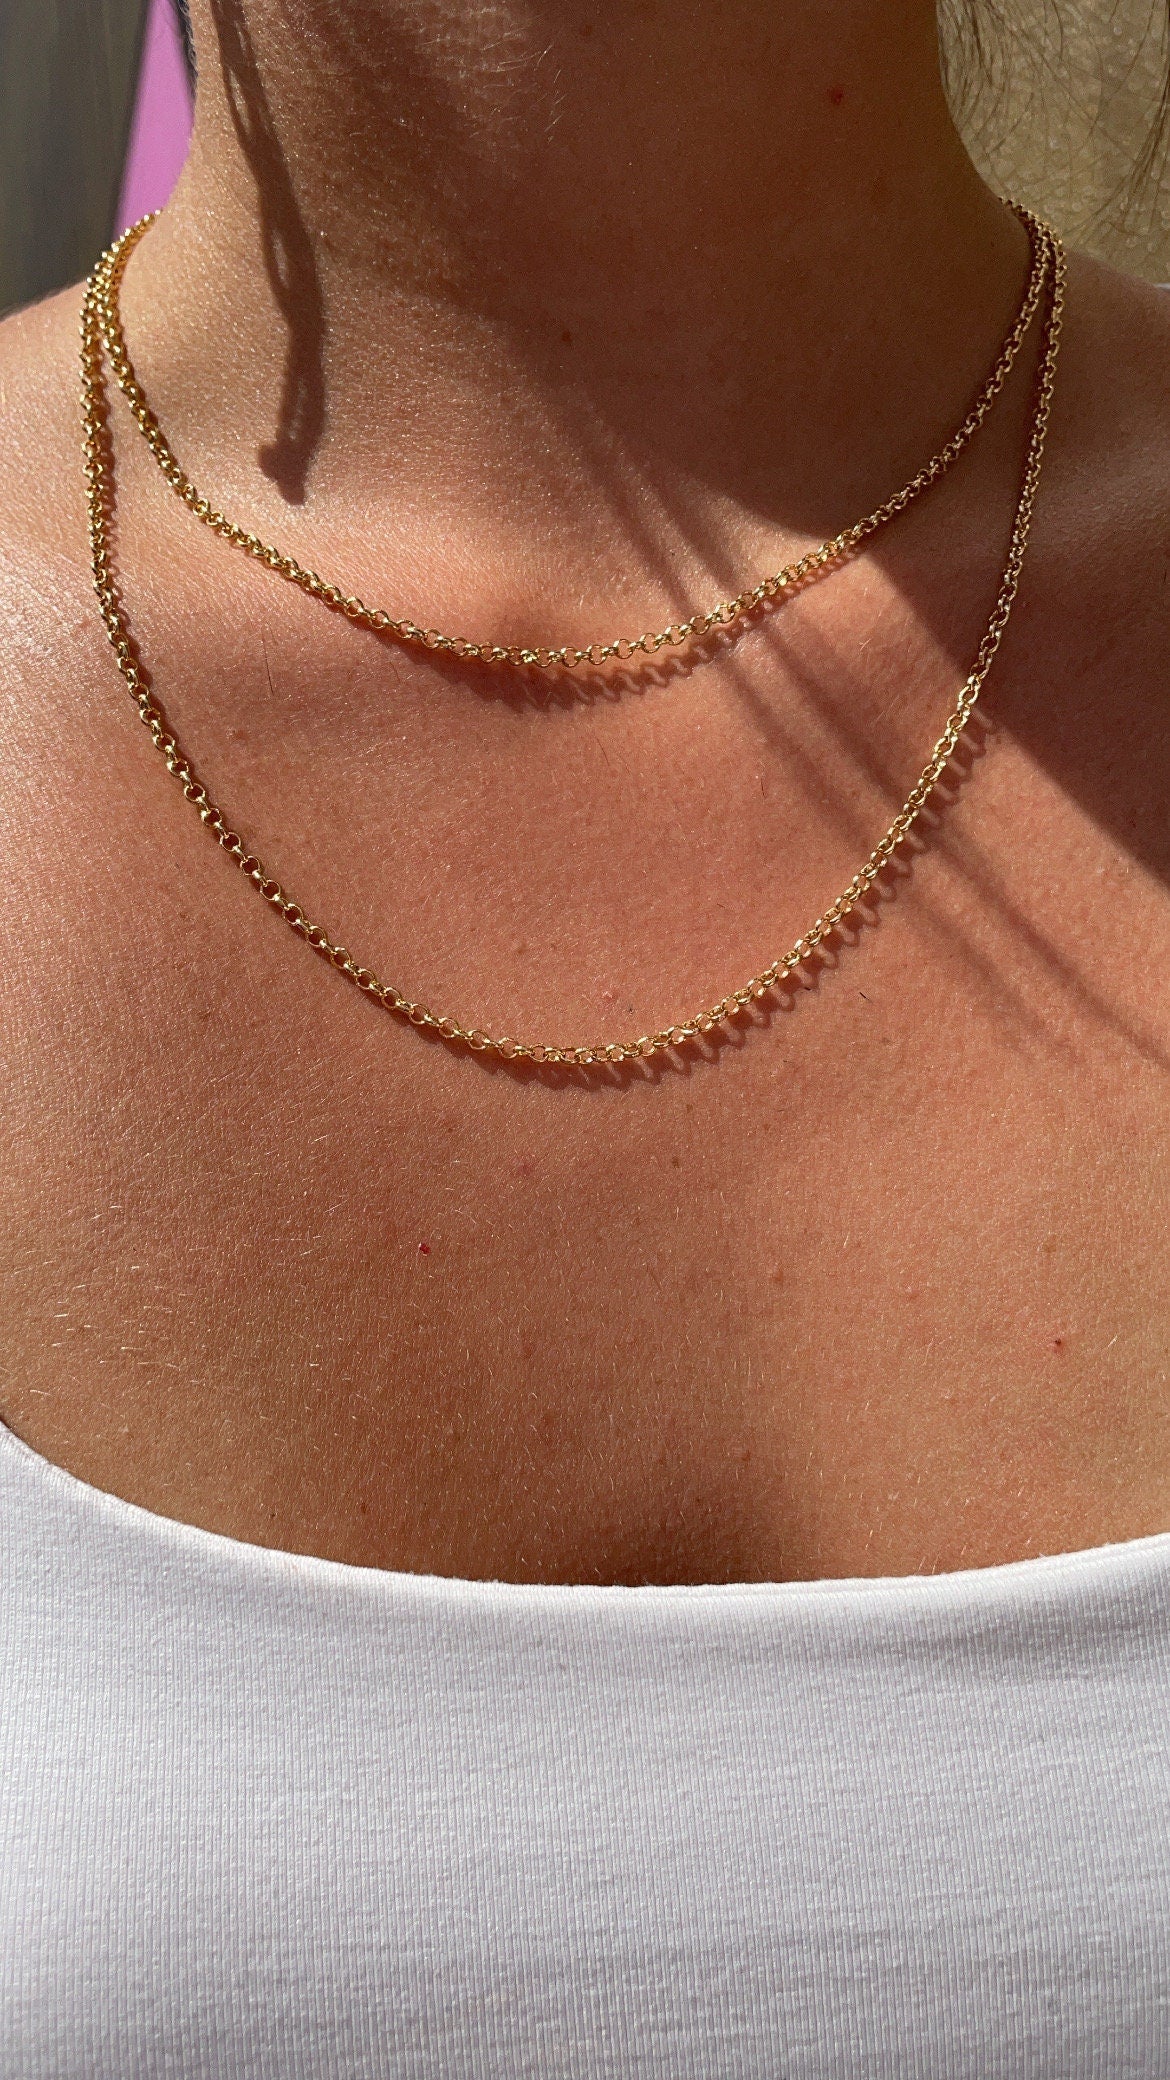 18k Gold Layered 2mm Cable Link Chain Dainty Necklace For Wholesale And Jewelry